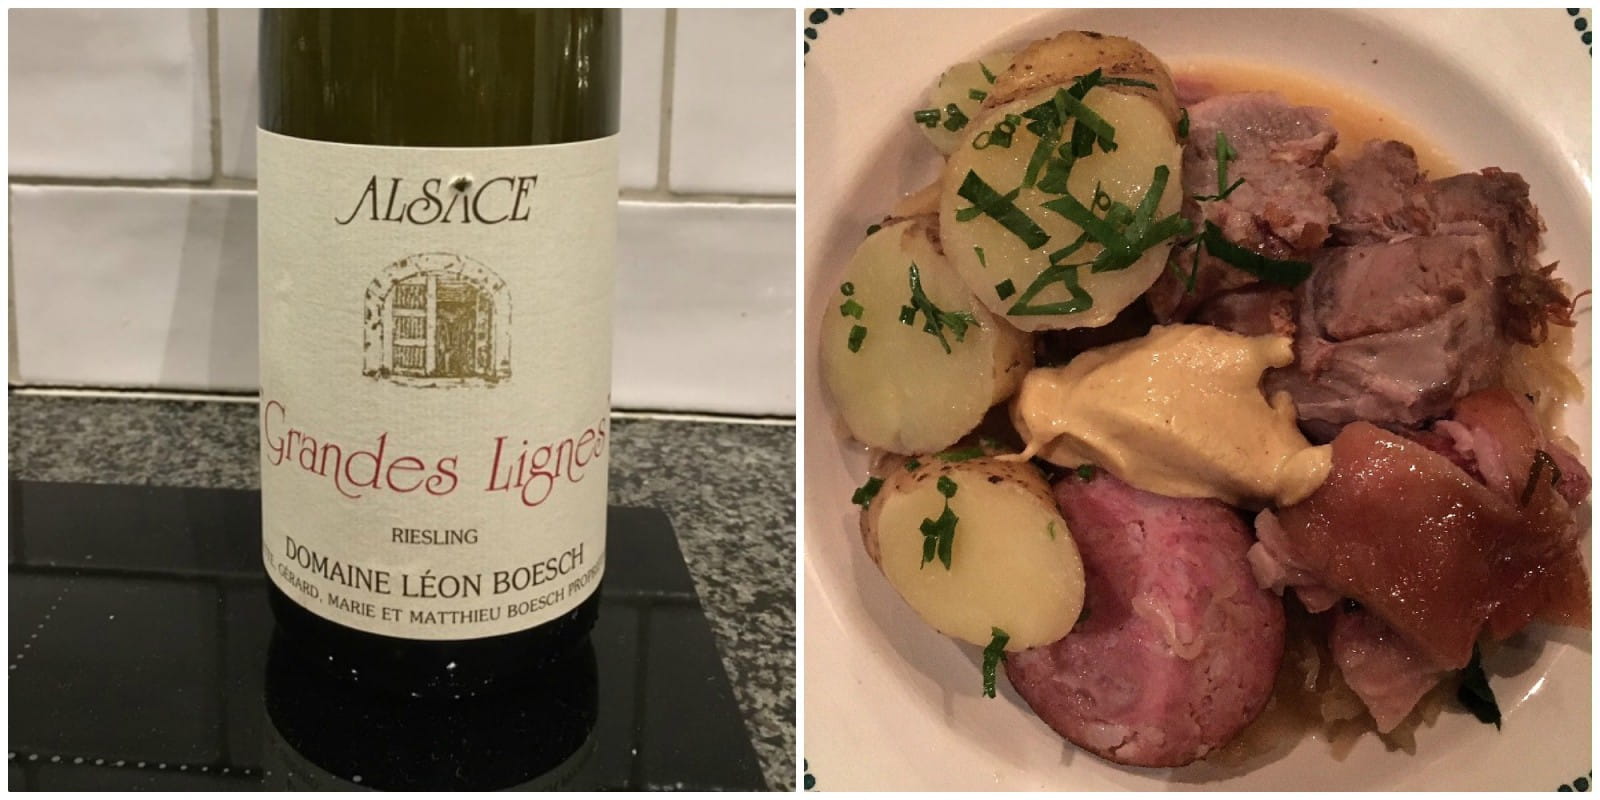 Choucroute and Alsace riesling